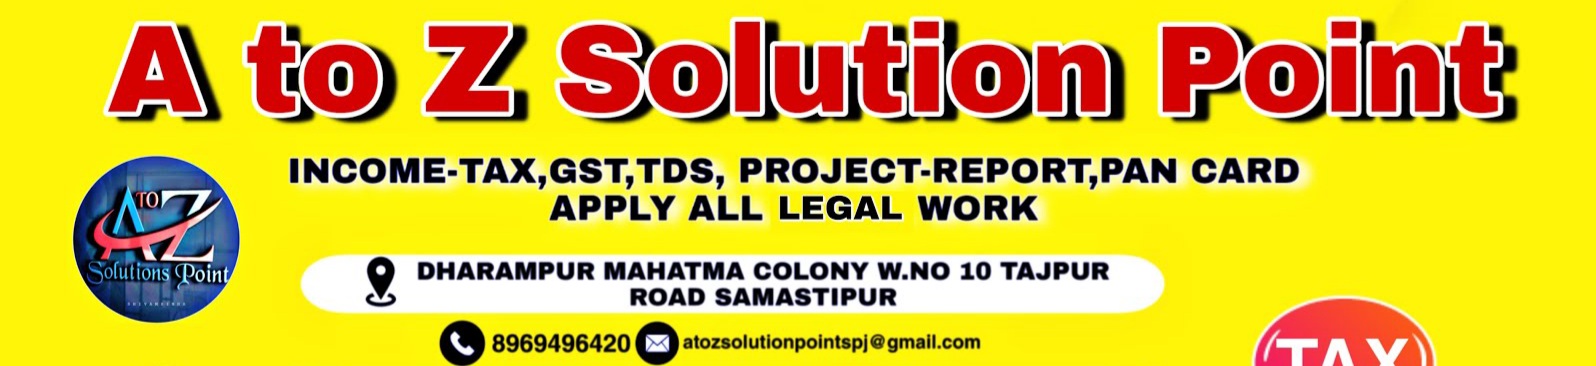 A to Z Solution Point. Logo